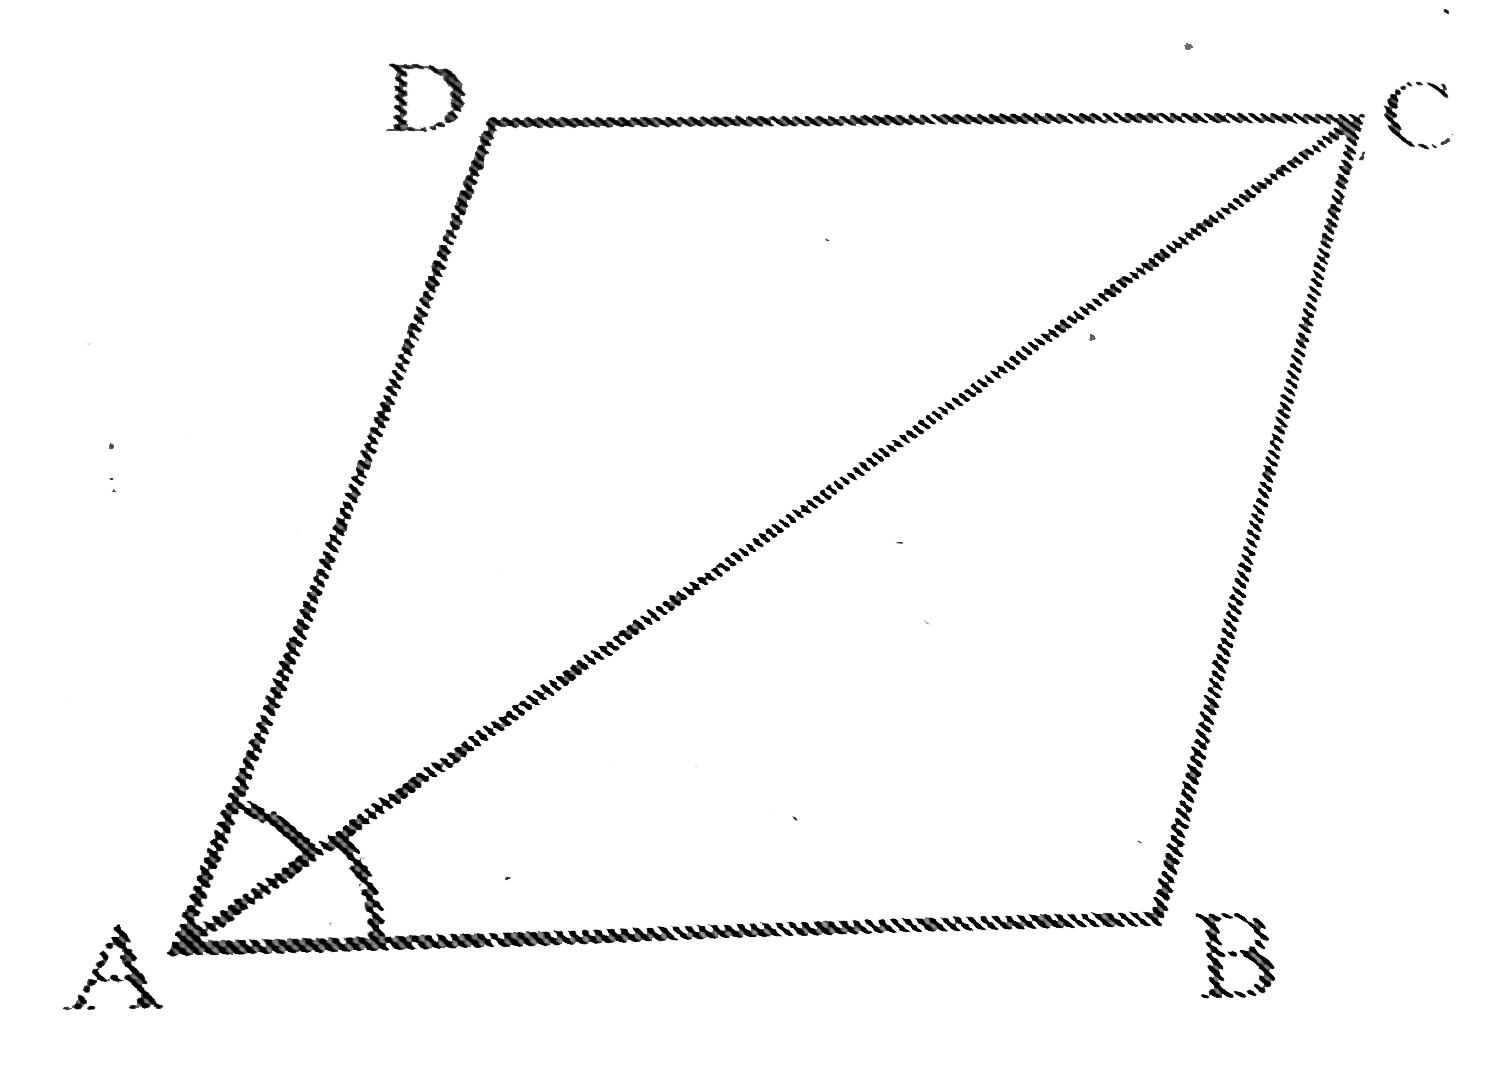 Diagonal AC of  a parallelogram ABCD bisects \ /A. Show that (i) it bisects  \ /C also, (ii)  ABCD is a rhombus.